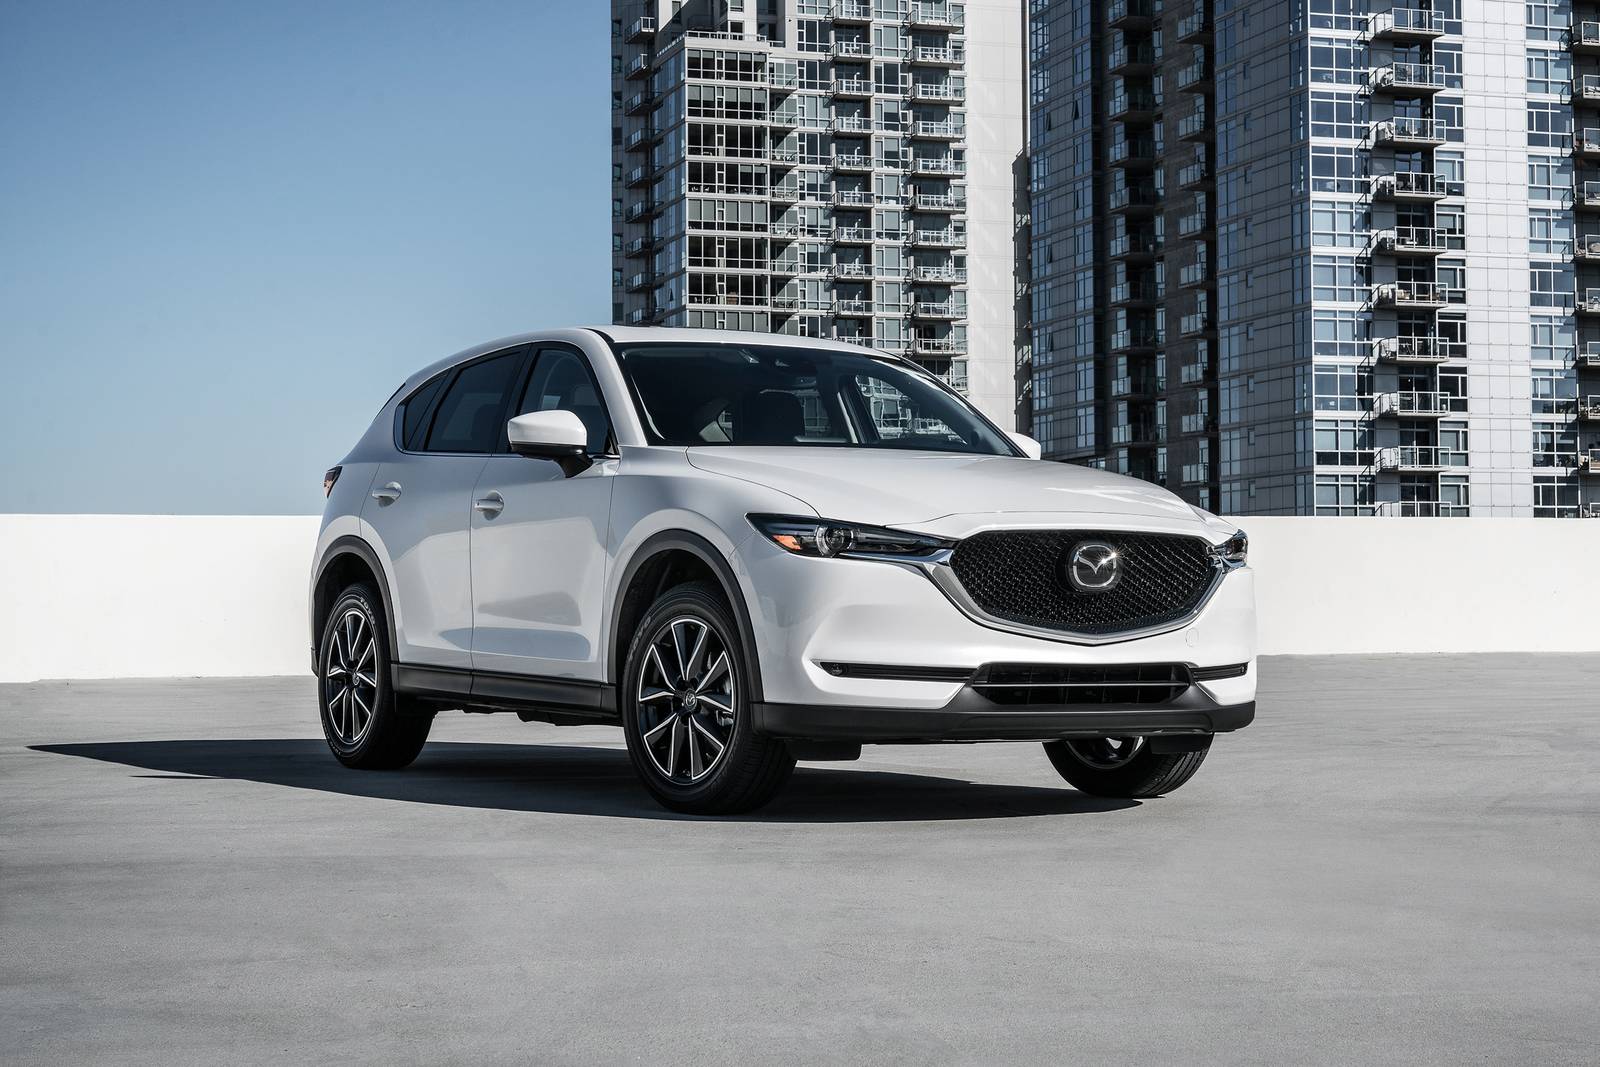 Mazda CX-5: The Pioneer of Sporty Japanese SUVs (Used Buying Guide)